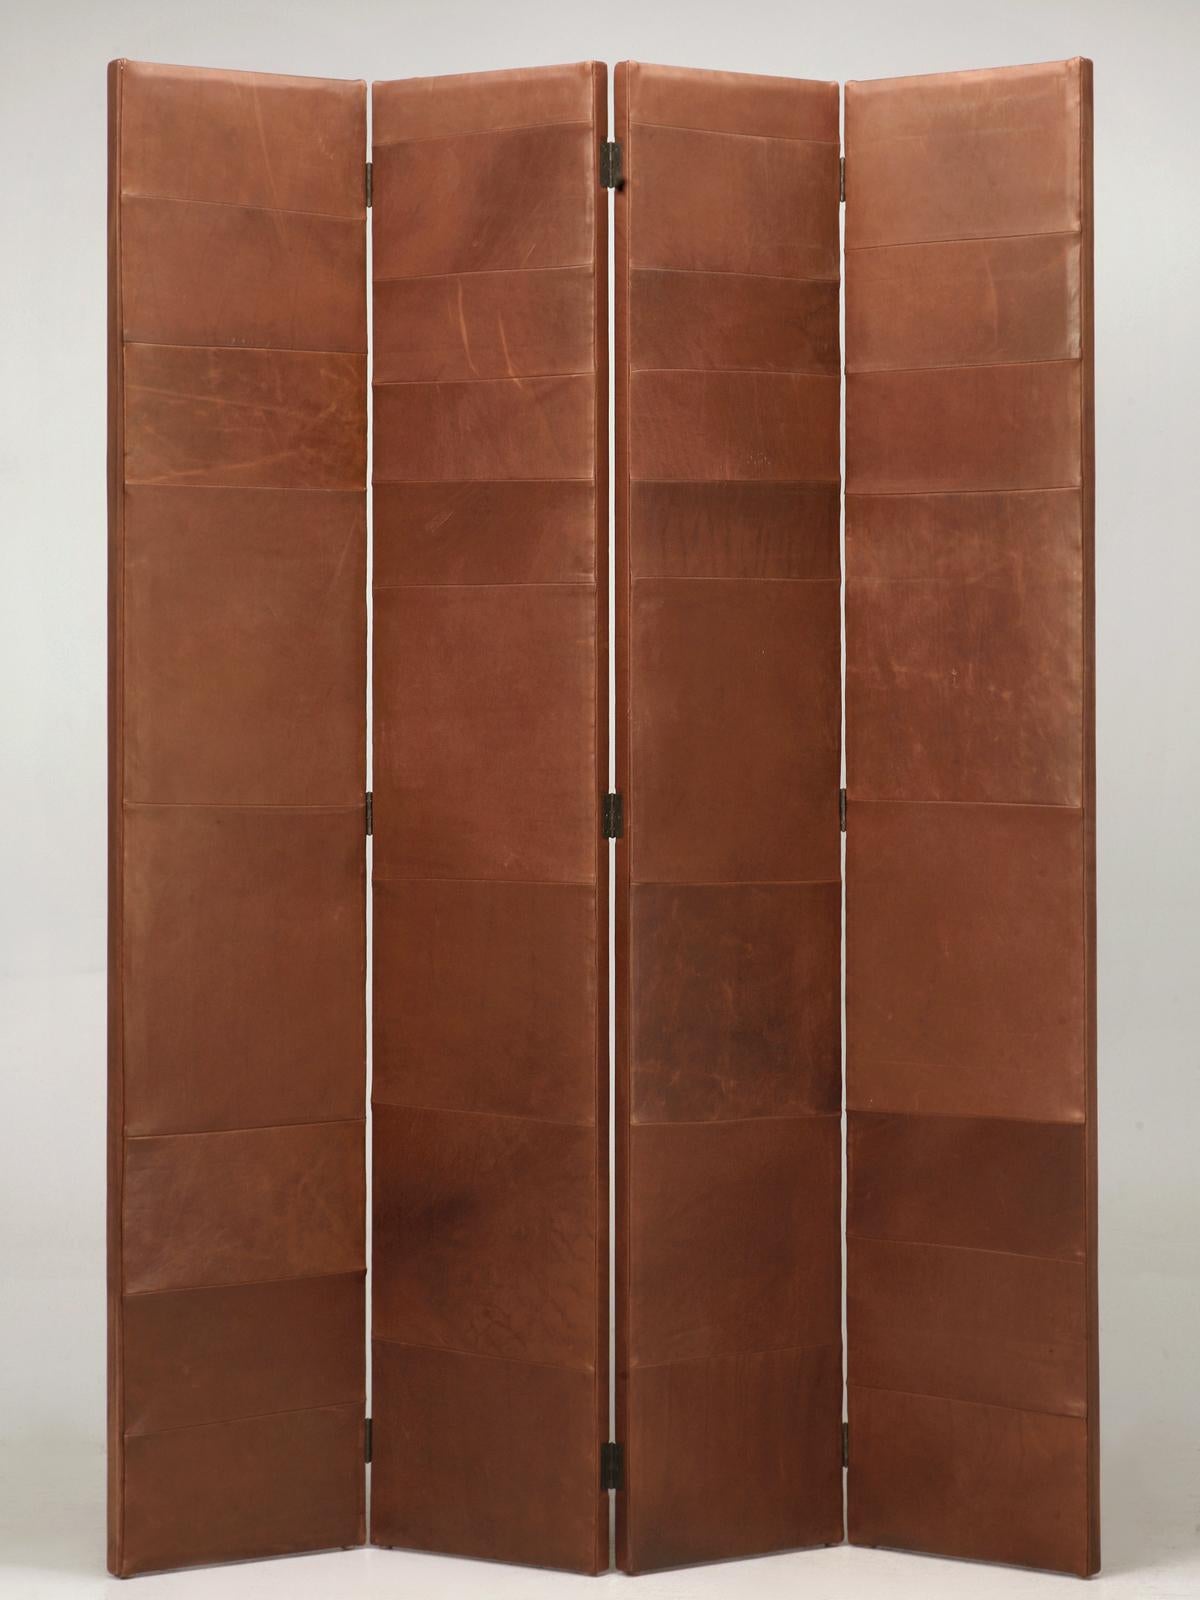 Leather Four-Panel Folding Screen or Room Divider with Bronze Nails Very Heavy For Sale 3